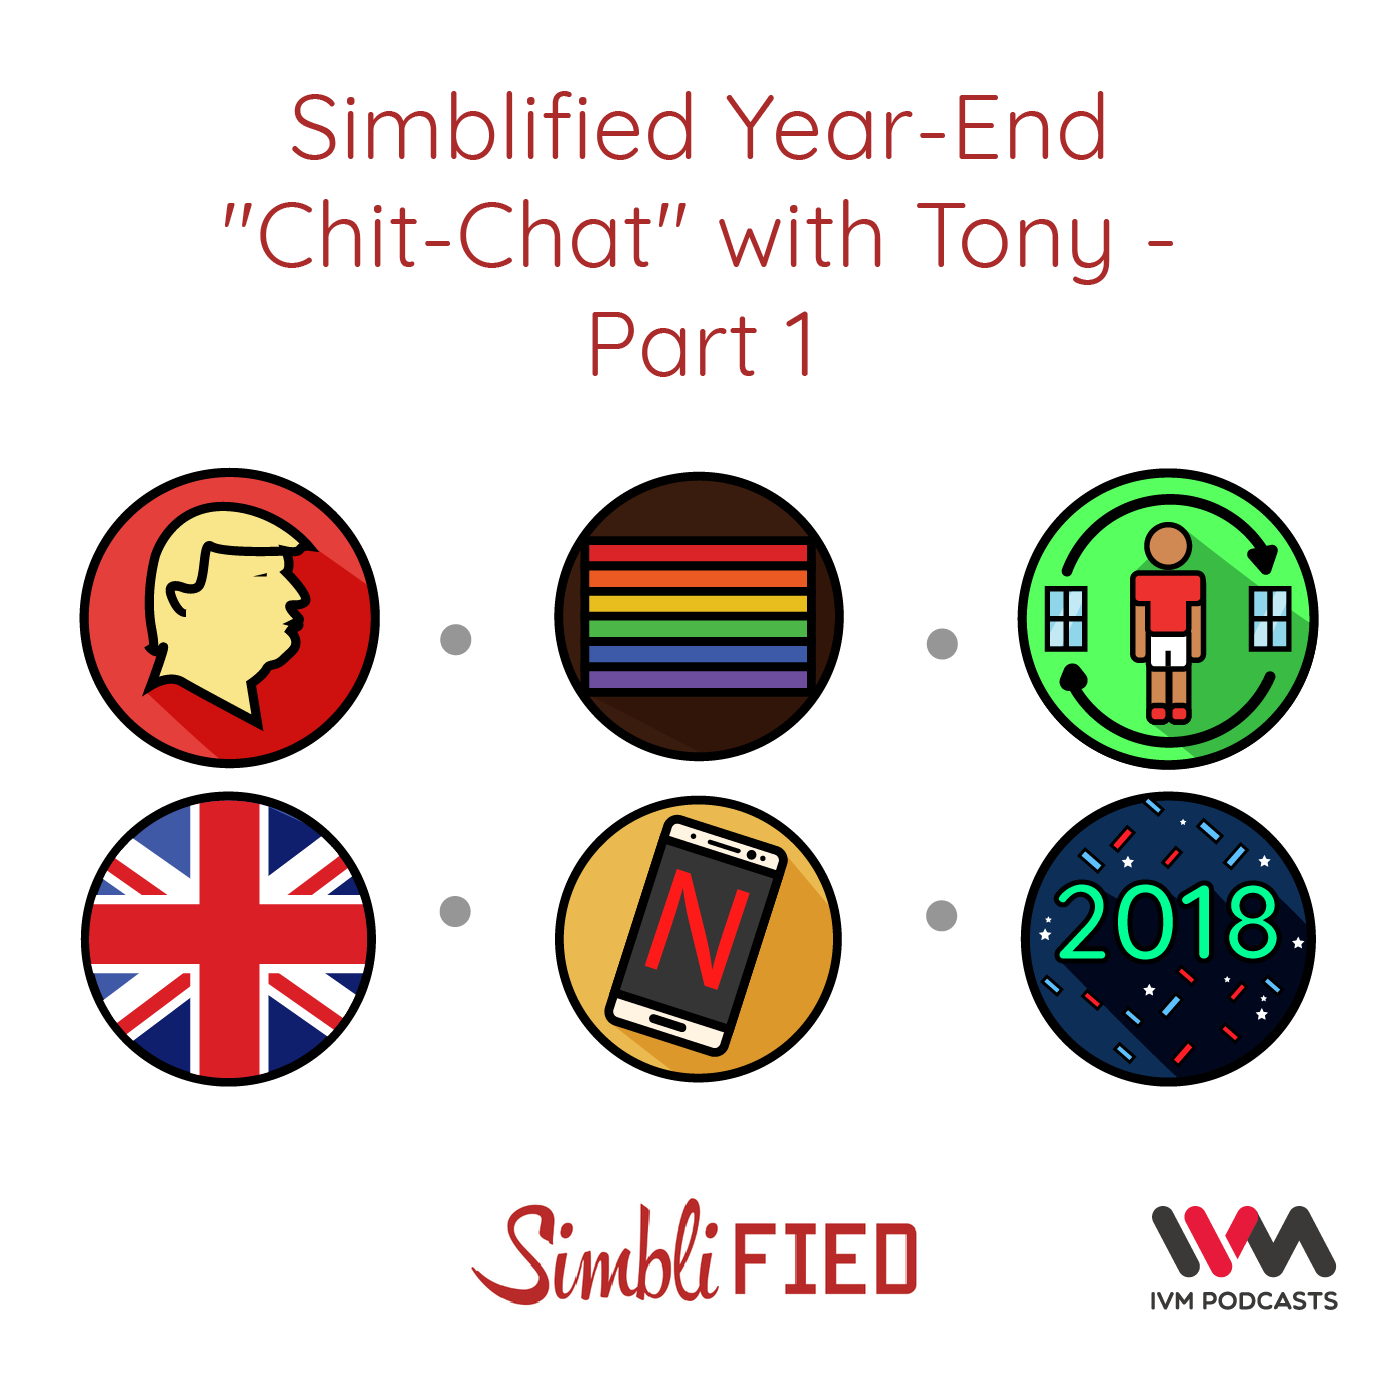 Ep. 115: Simblified Year-End "Chit-Chat" with Tony - Part 1